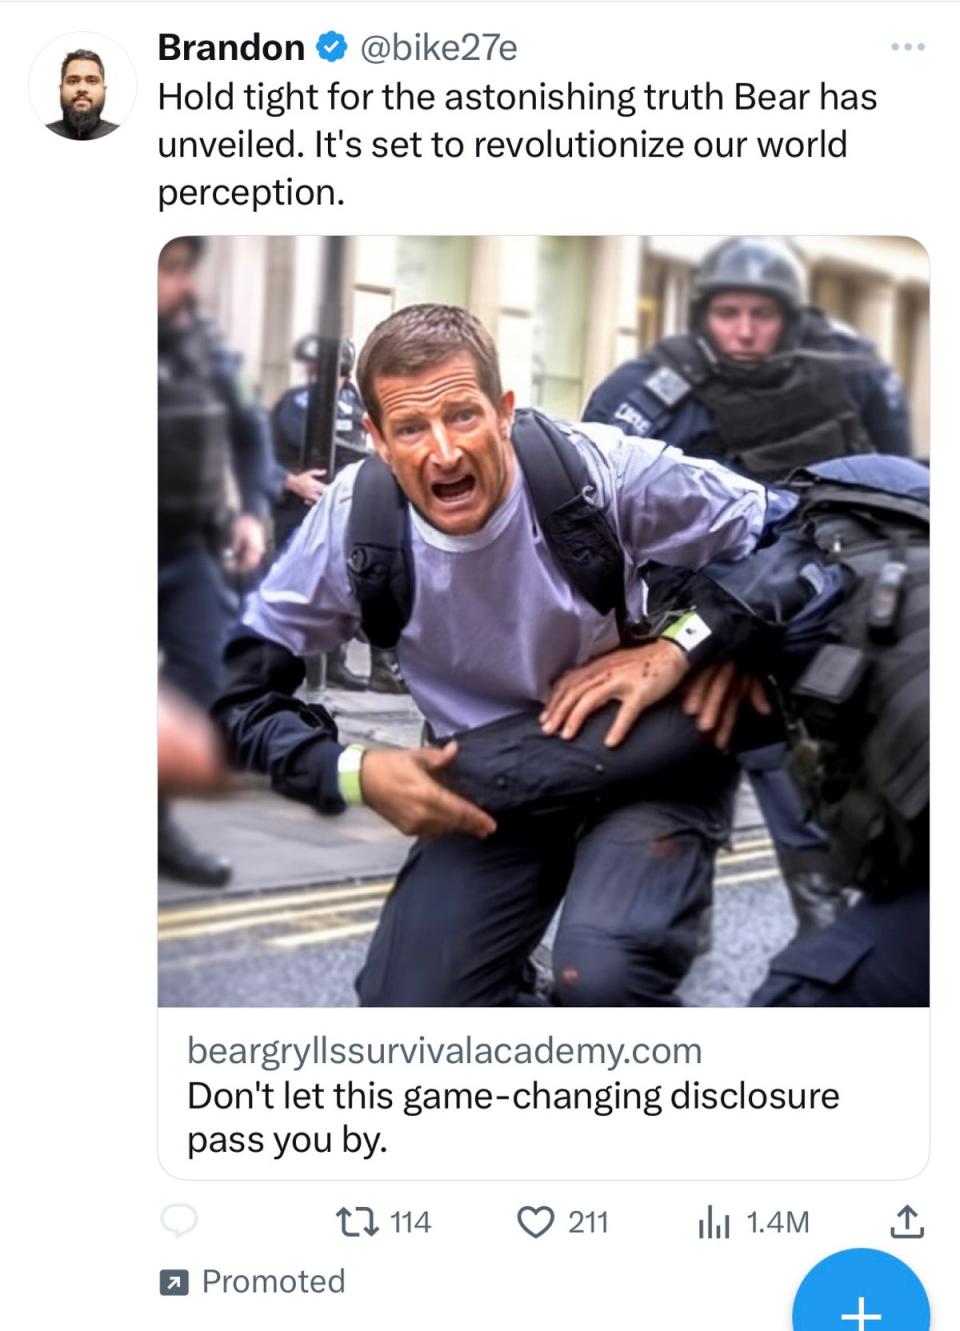 A fake AI-generated promoted ad post on Twitter shows someone who looks like Bear Grylls being arrested (Screenshot)